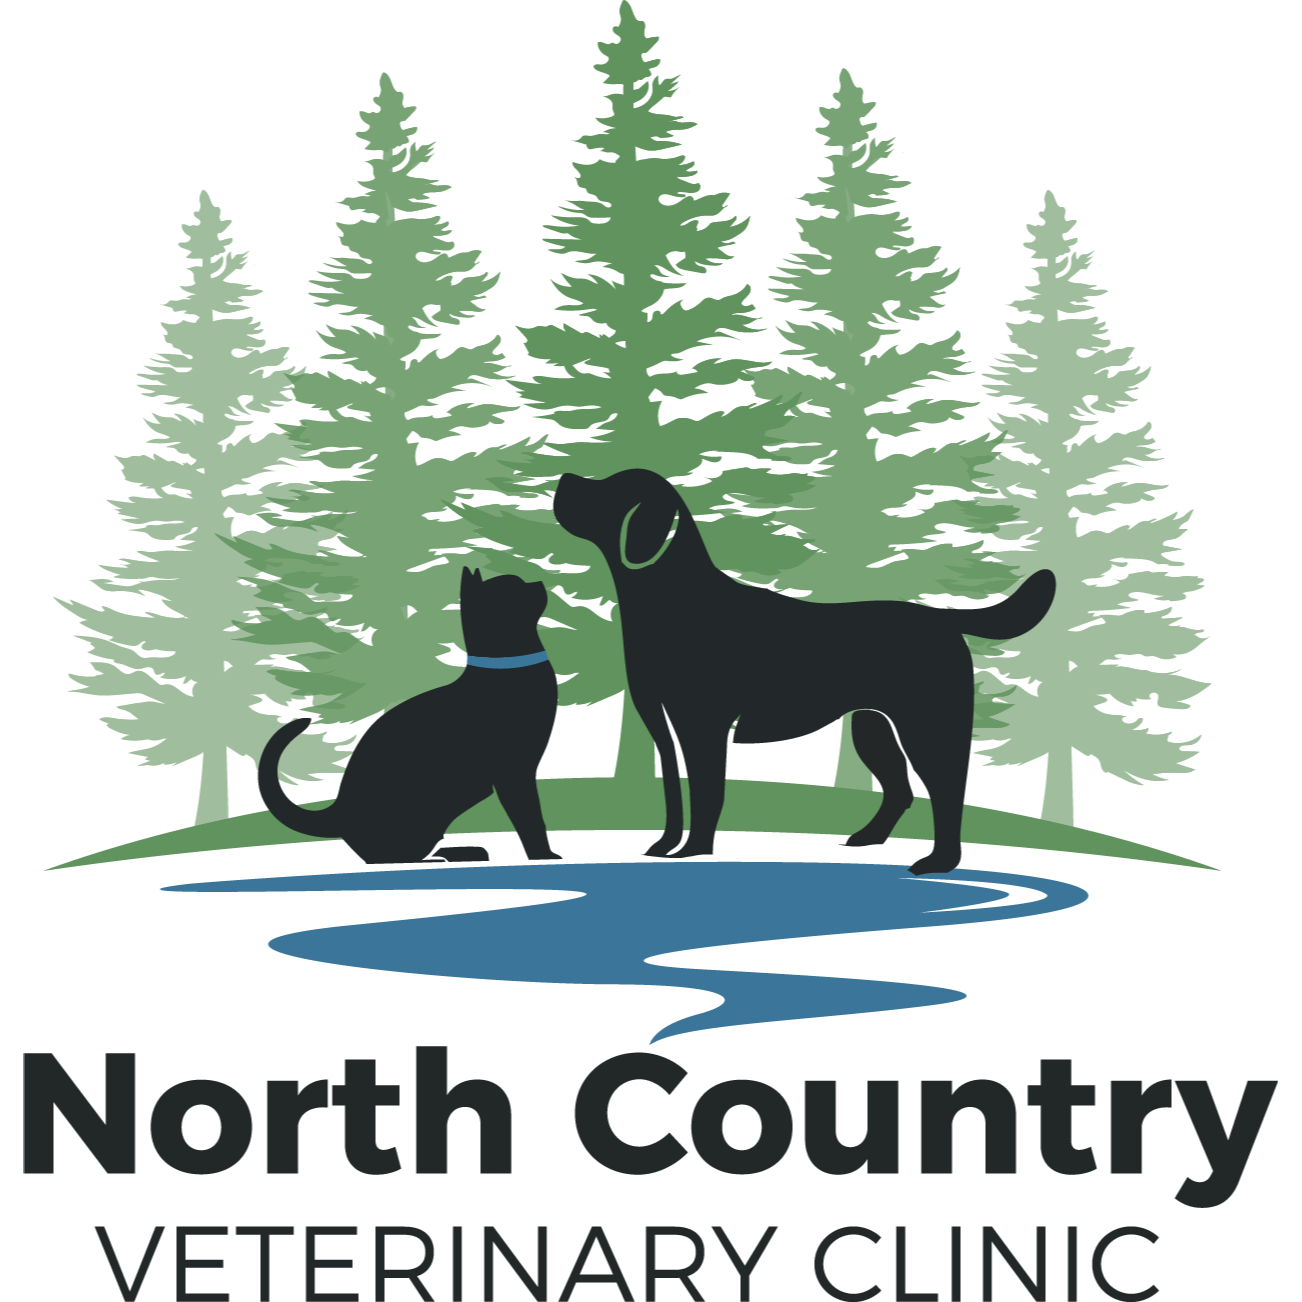 North Country Veterinary Clinic